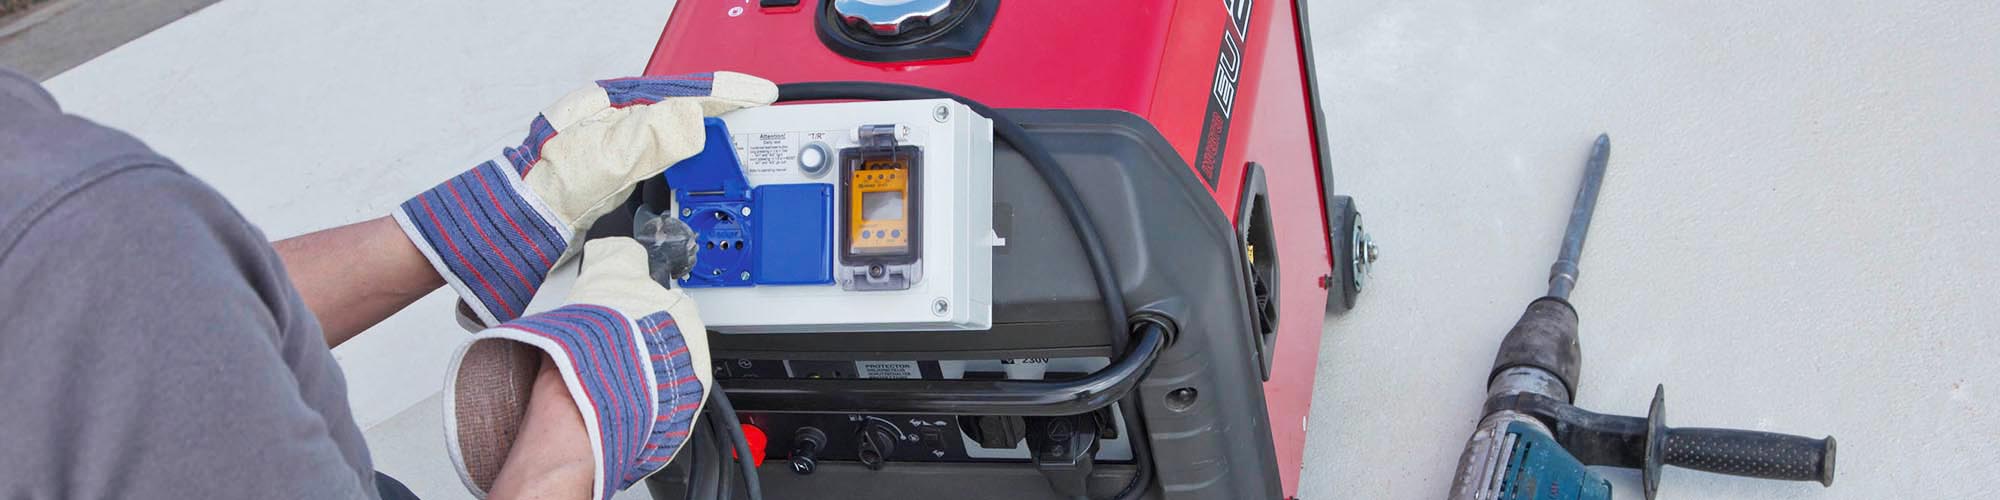 Using mobile generators safely